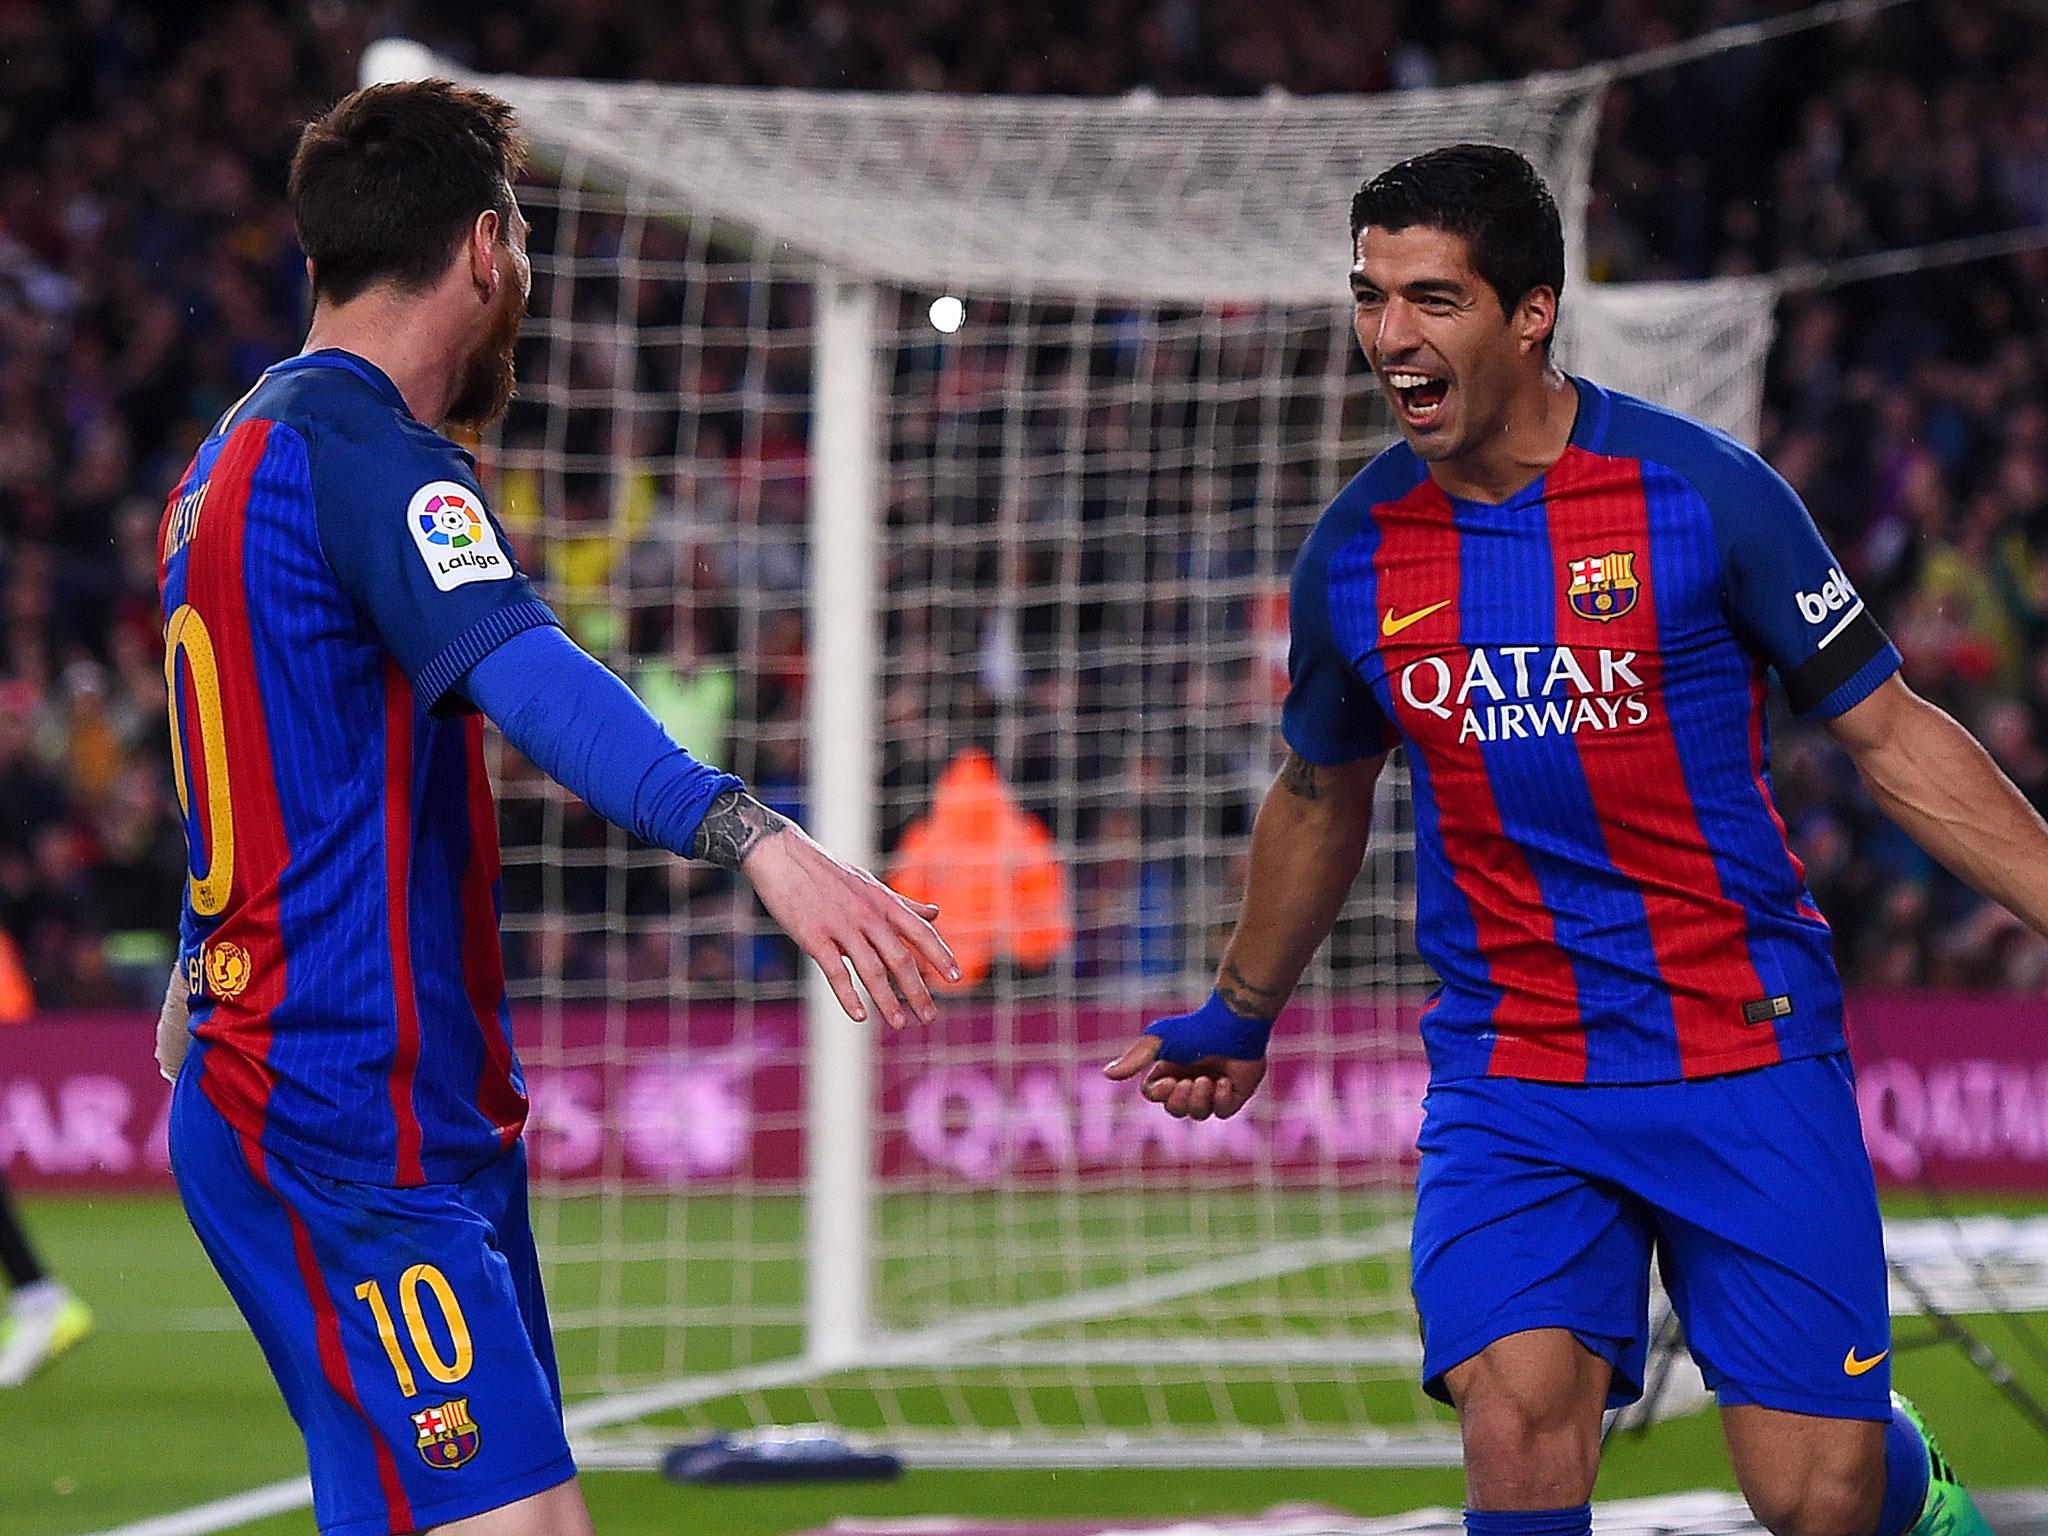 Messi scored twice and Suarez added another as Barcelona kept the pressure on the title race